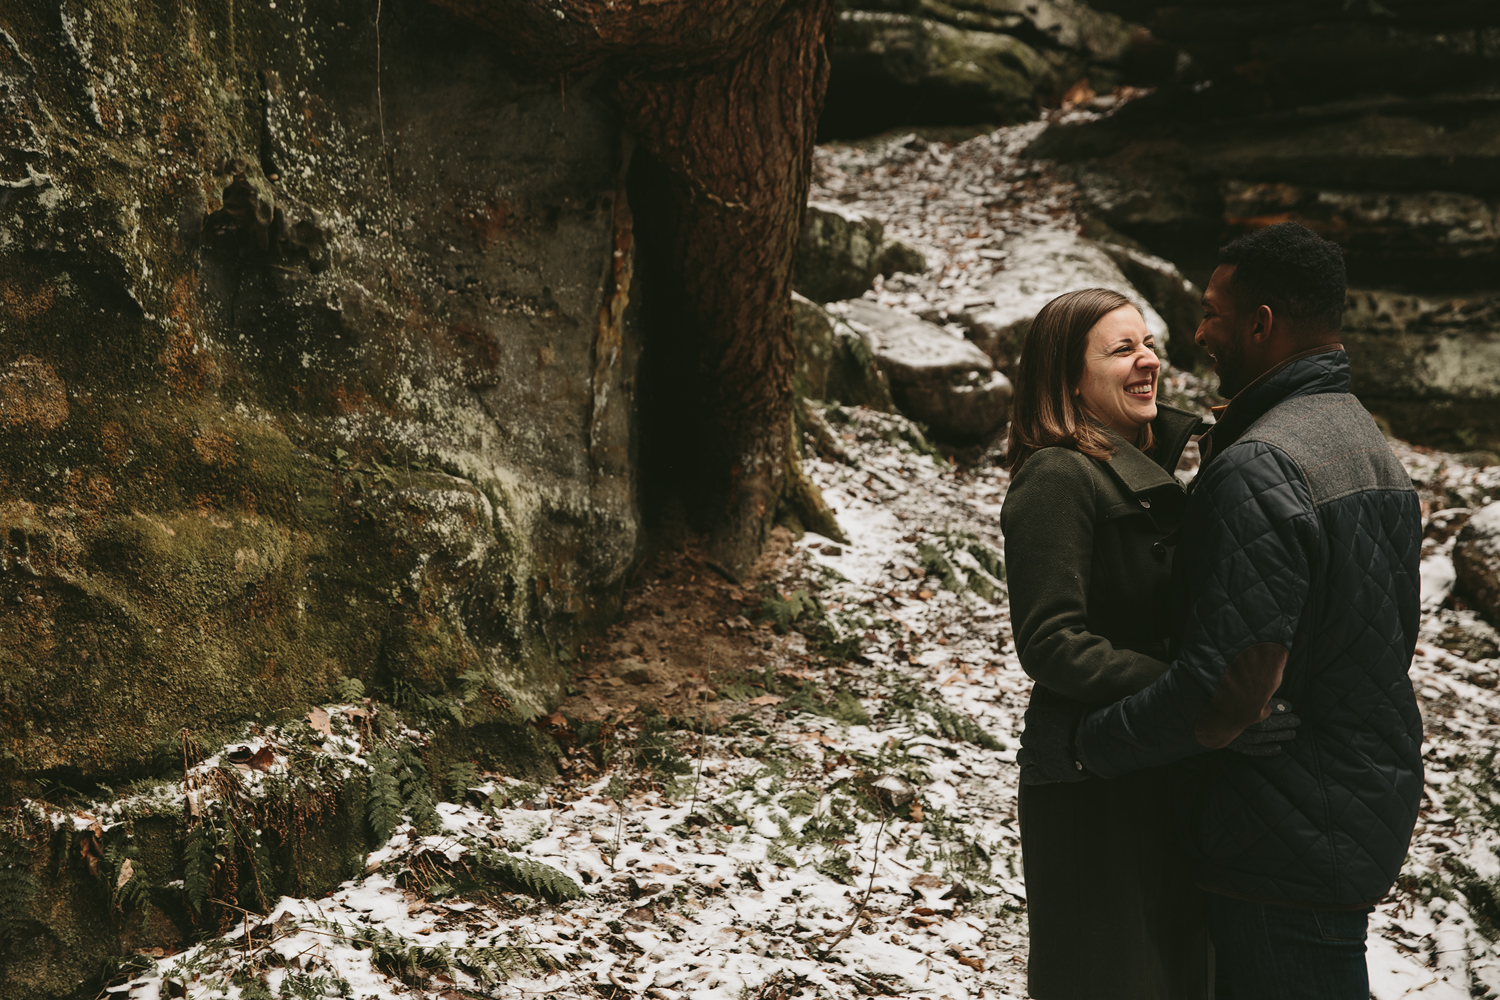 cuyahoga-valley-national-park-engagement-photography-8.jpg